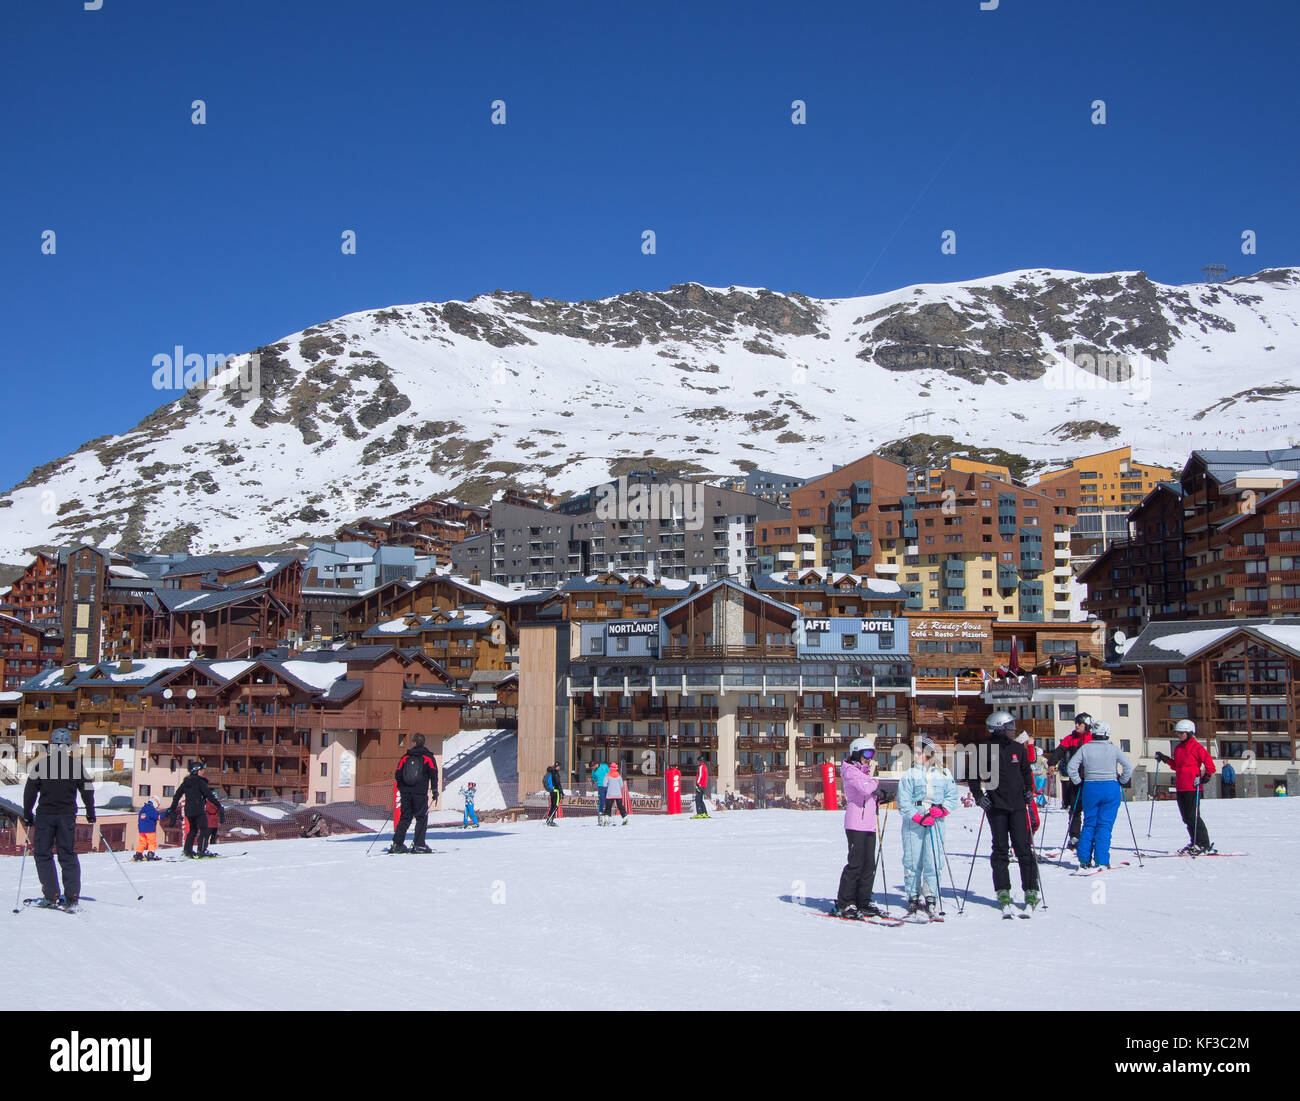 Val Thorens, France   March  18, 2017: people on the ski slopes in the center of the mountain village in a blue sky day Stock Photo